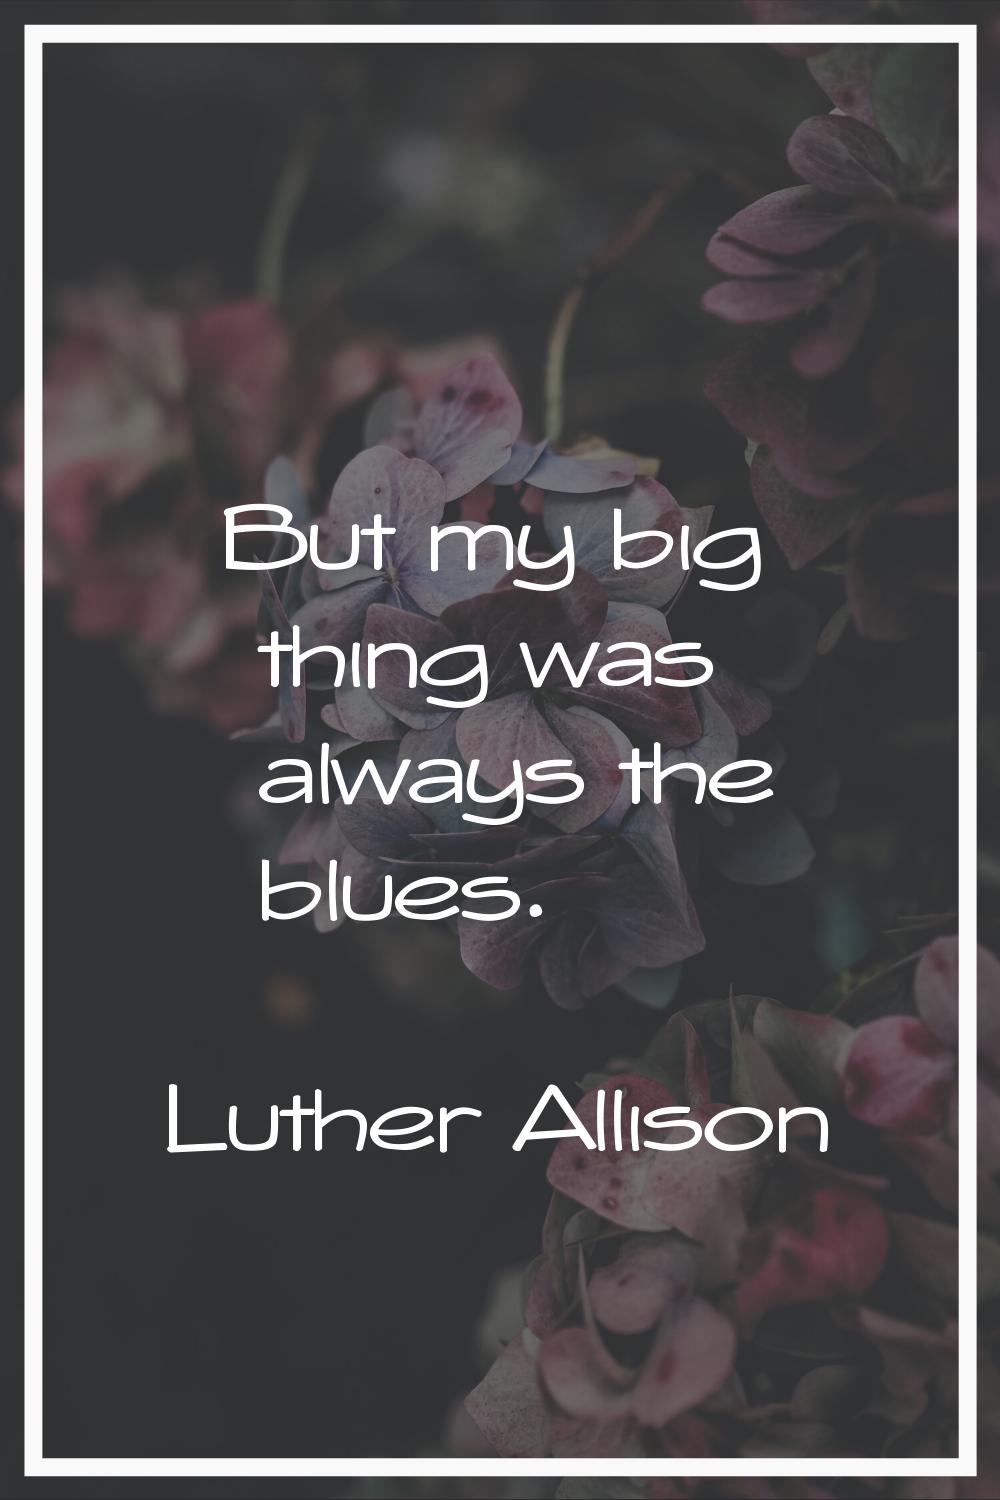 But my big thing was always the blues.